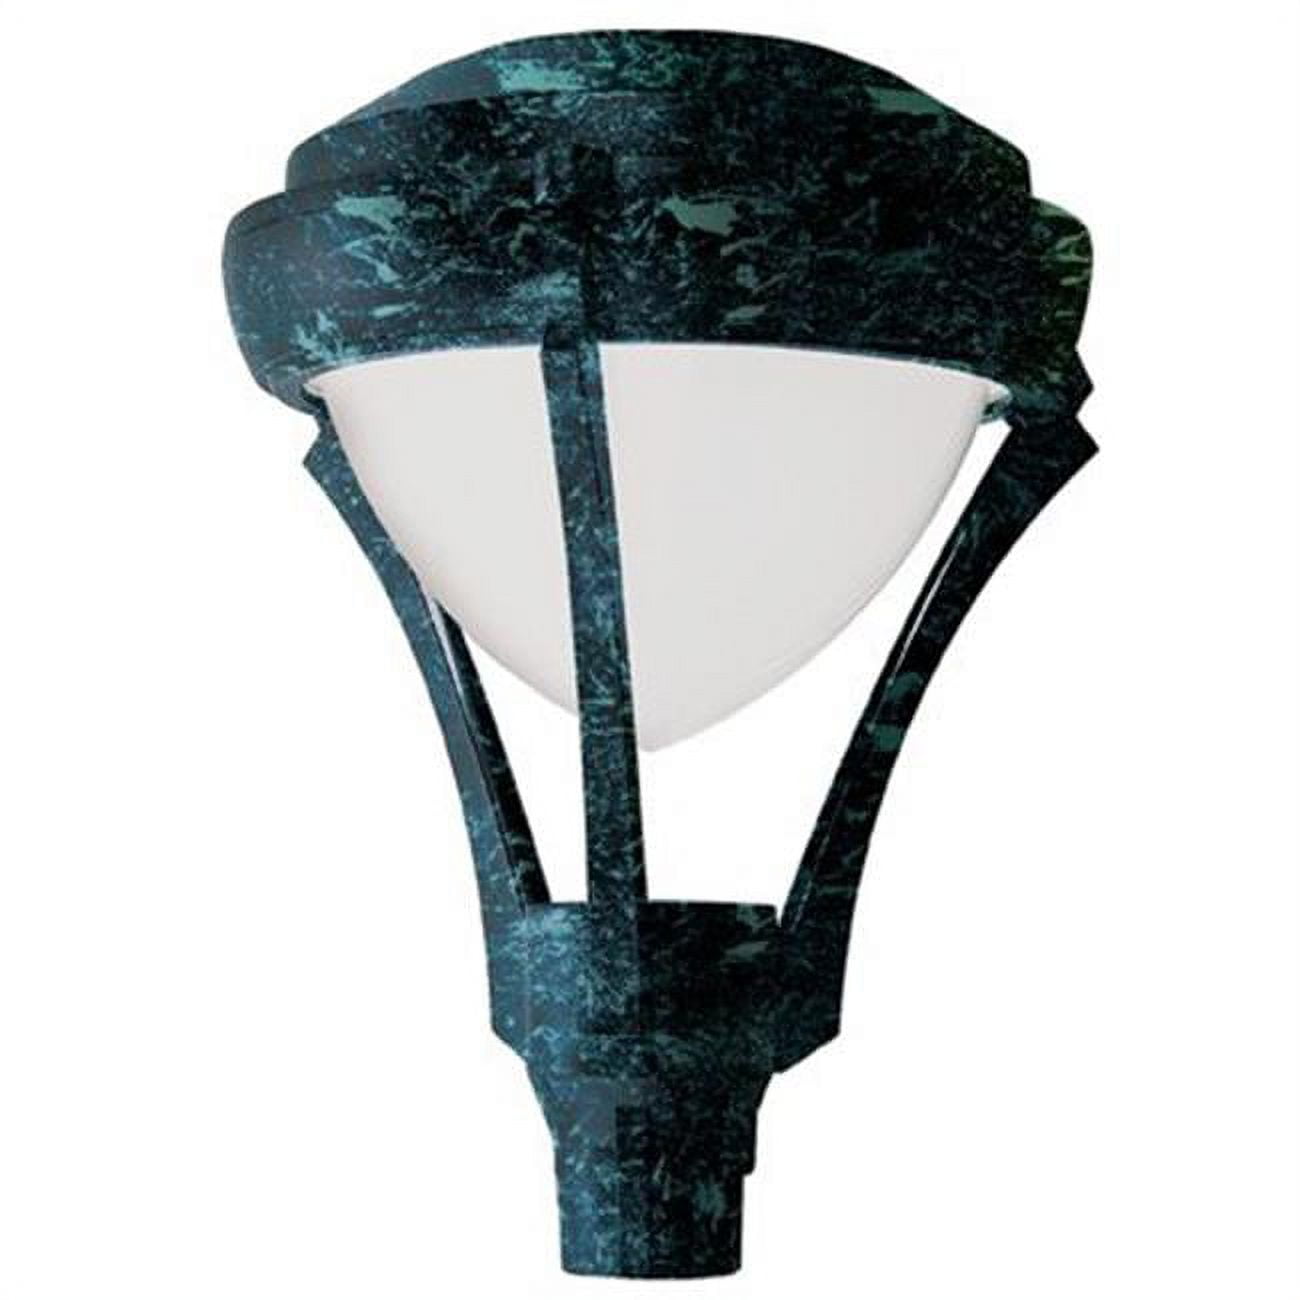 Picture of Dabmar Lighting GM590-VG 35W 120V Powder Coated Cast Aluminum Post Top Light Fixture with High Pressure Sodium Lamp, Verde Green - 27.95 x 21.65 x 21.65 in.